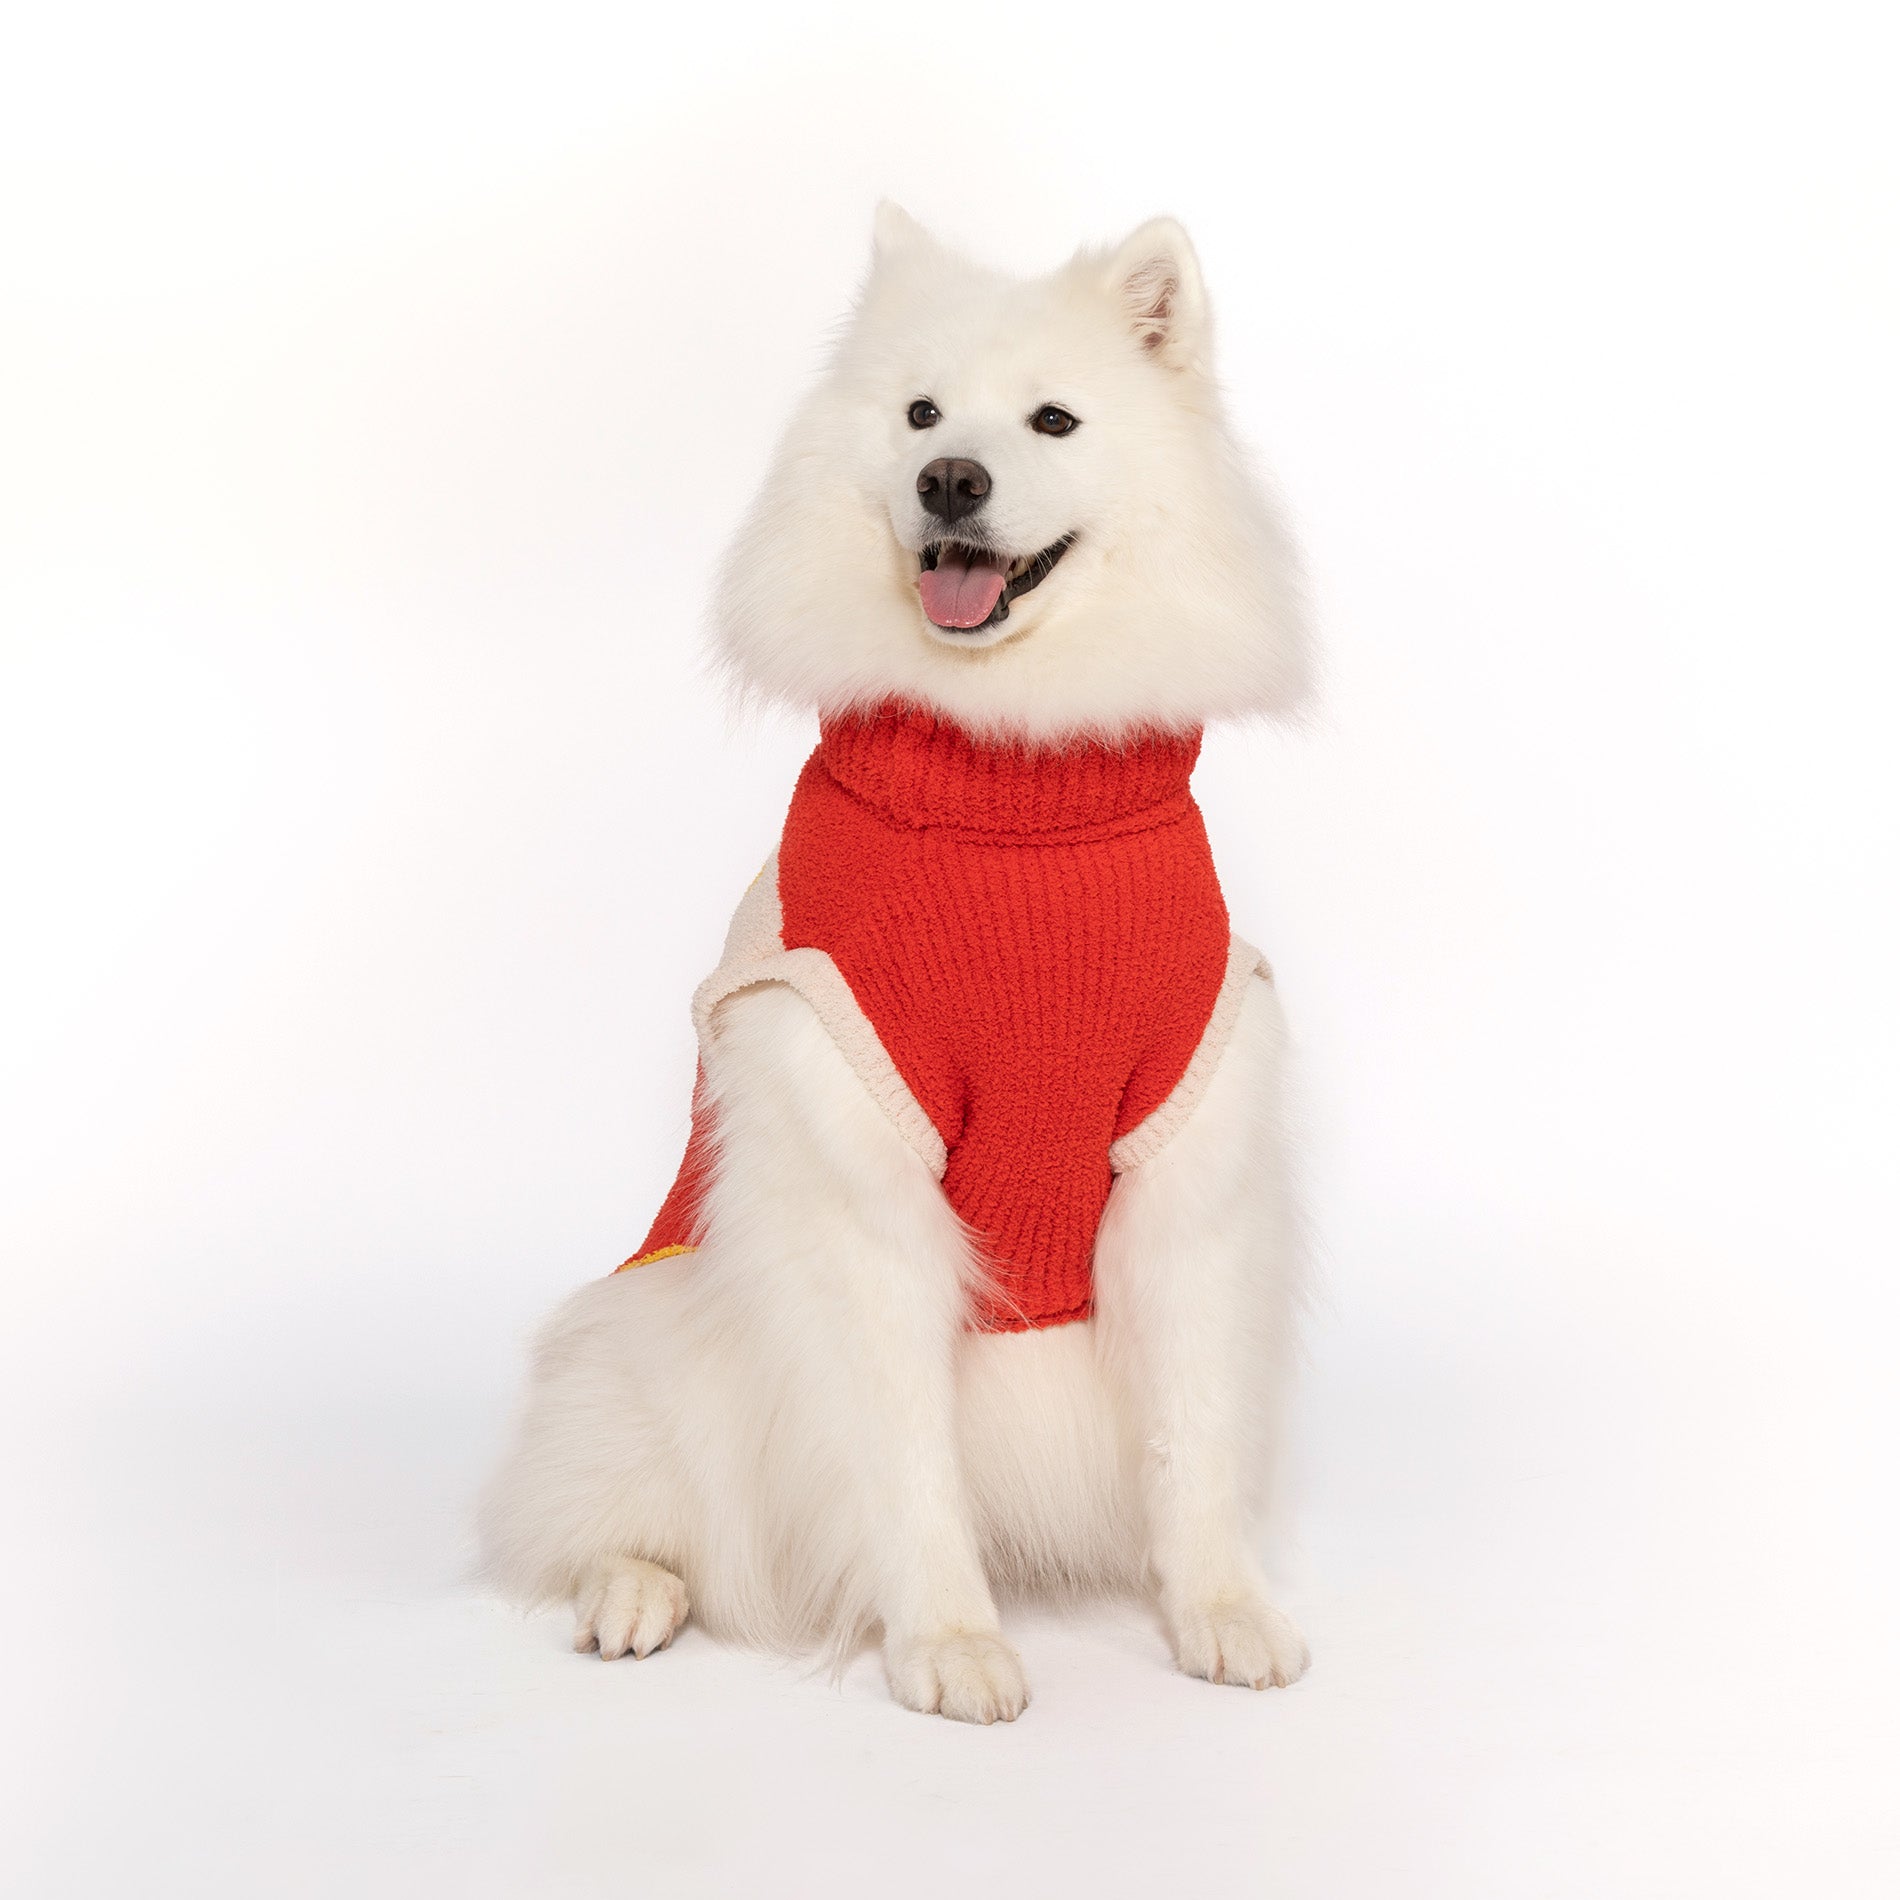 A cheerful Samoyed wearing a cozy red turtleneck sweater from The Furryfolks collection, posed against a white backdrop. The sweater's snug fit and vibrant color contrast beautifully with the dog's fluffy white fur.